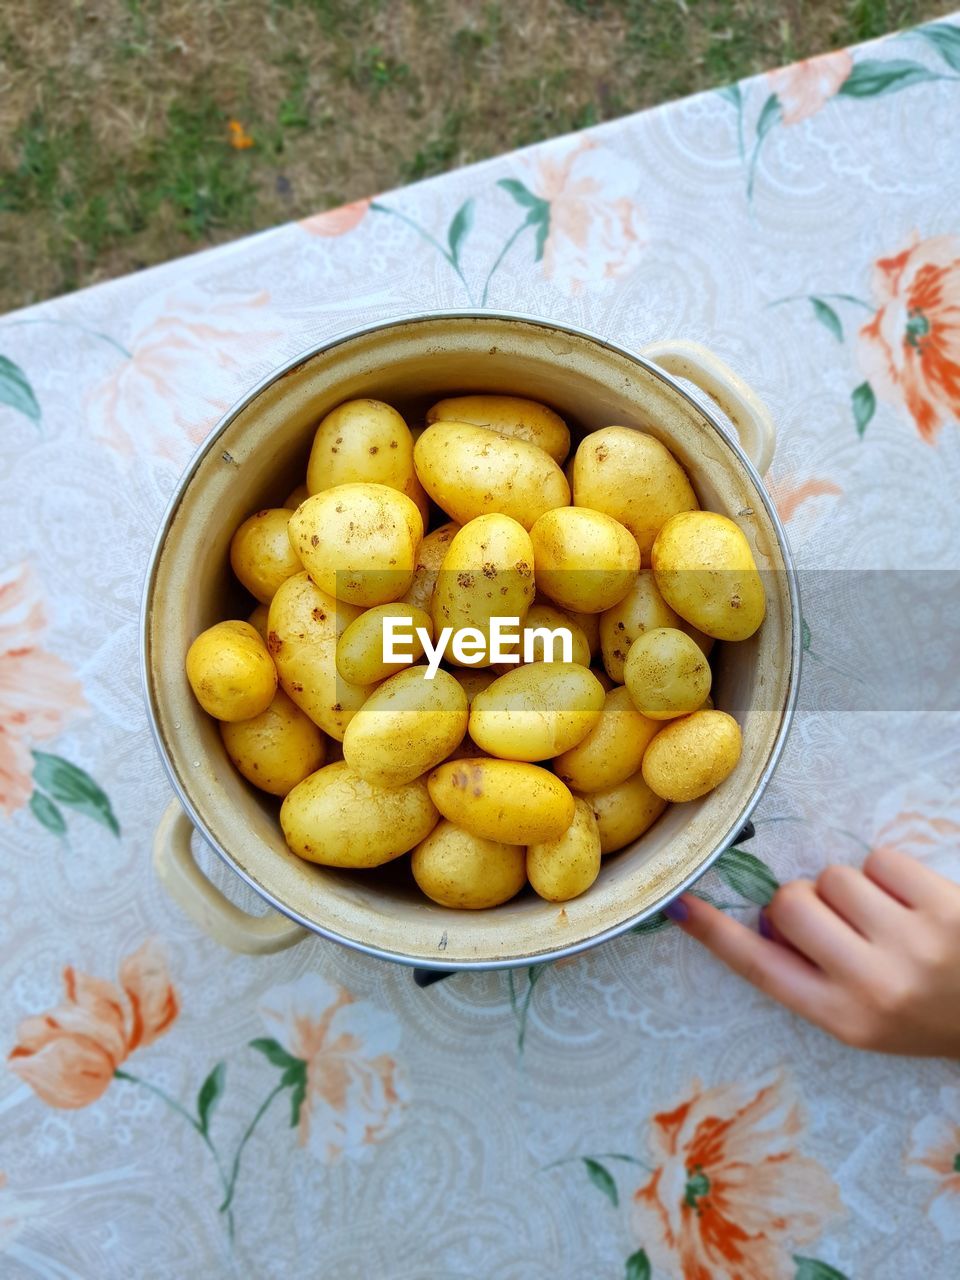 Cropped hand touching bowl of boiled potatoes on table